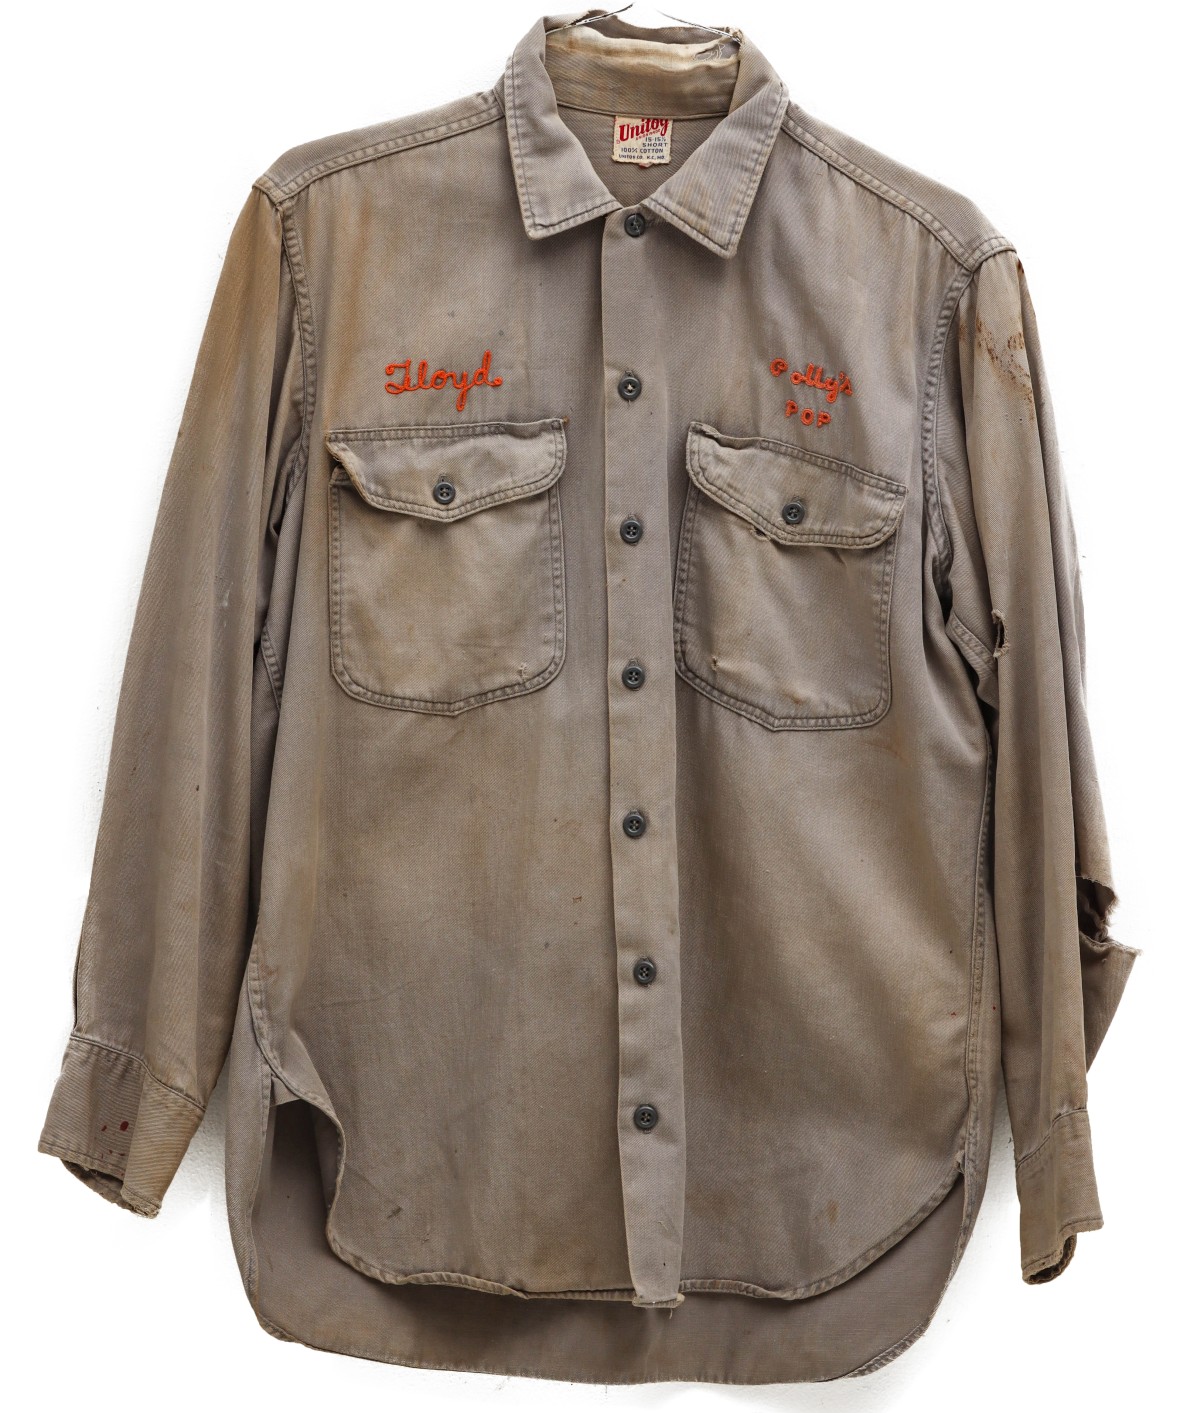 A CIRCA 1940 STAFF WORKWEAR SHIRT FOR POLLY'S POP